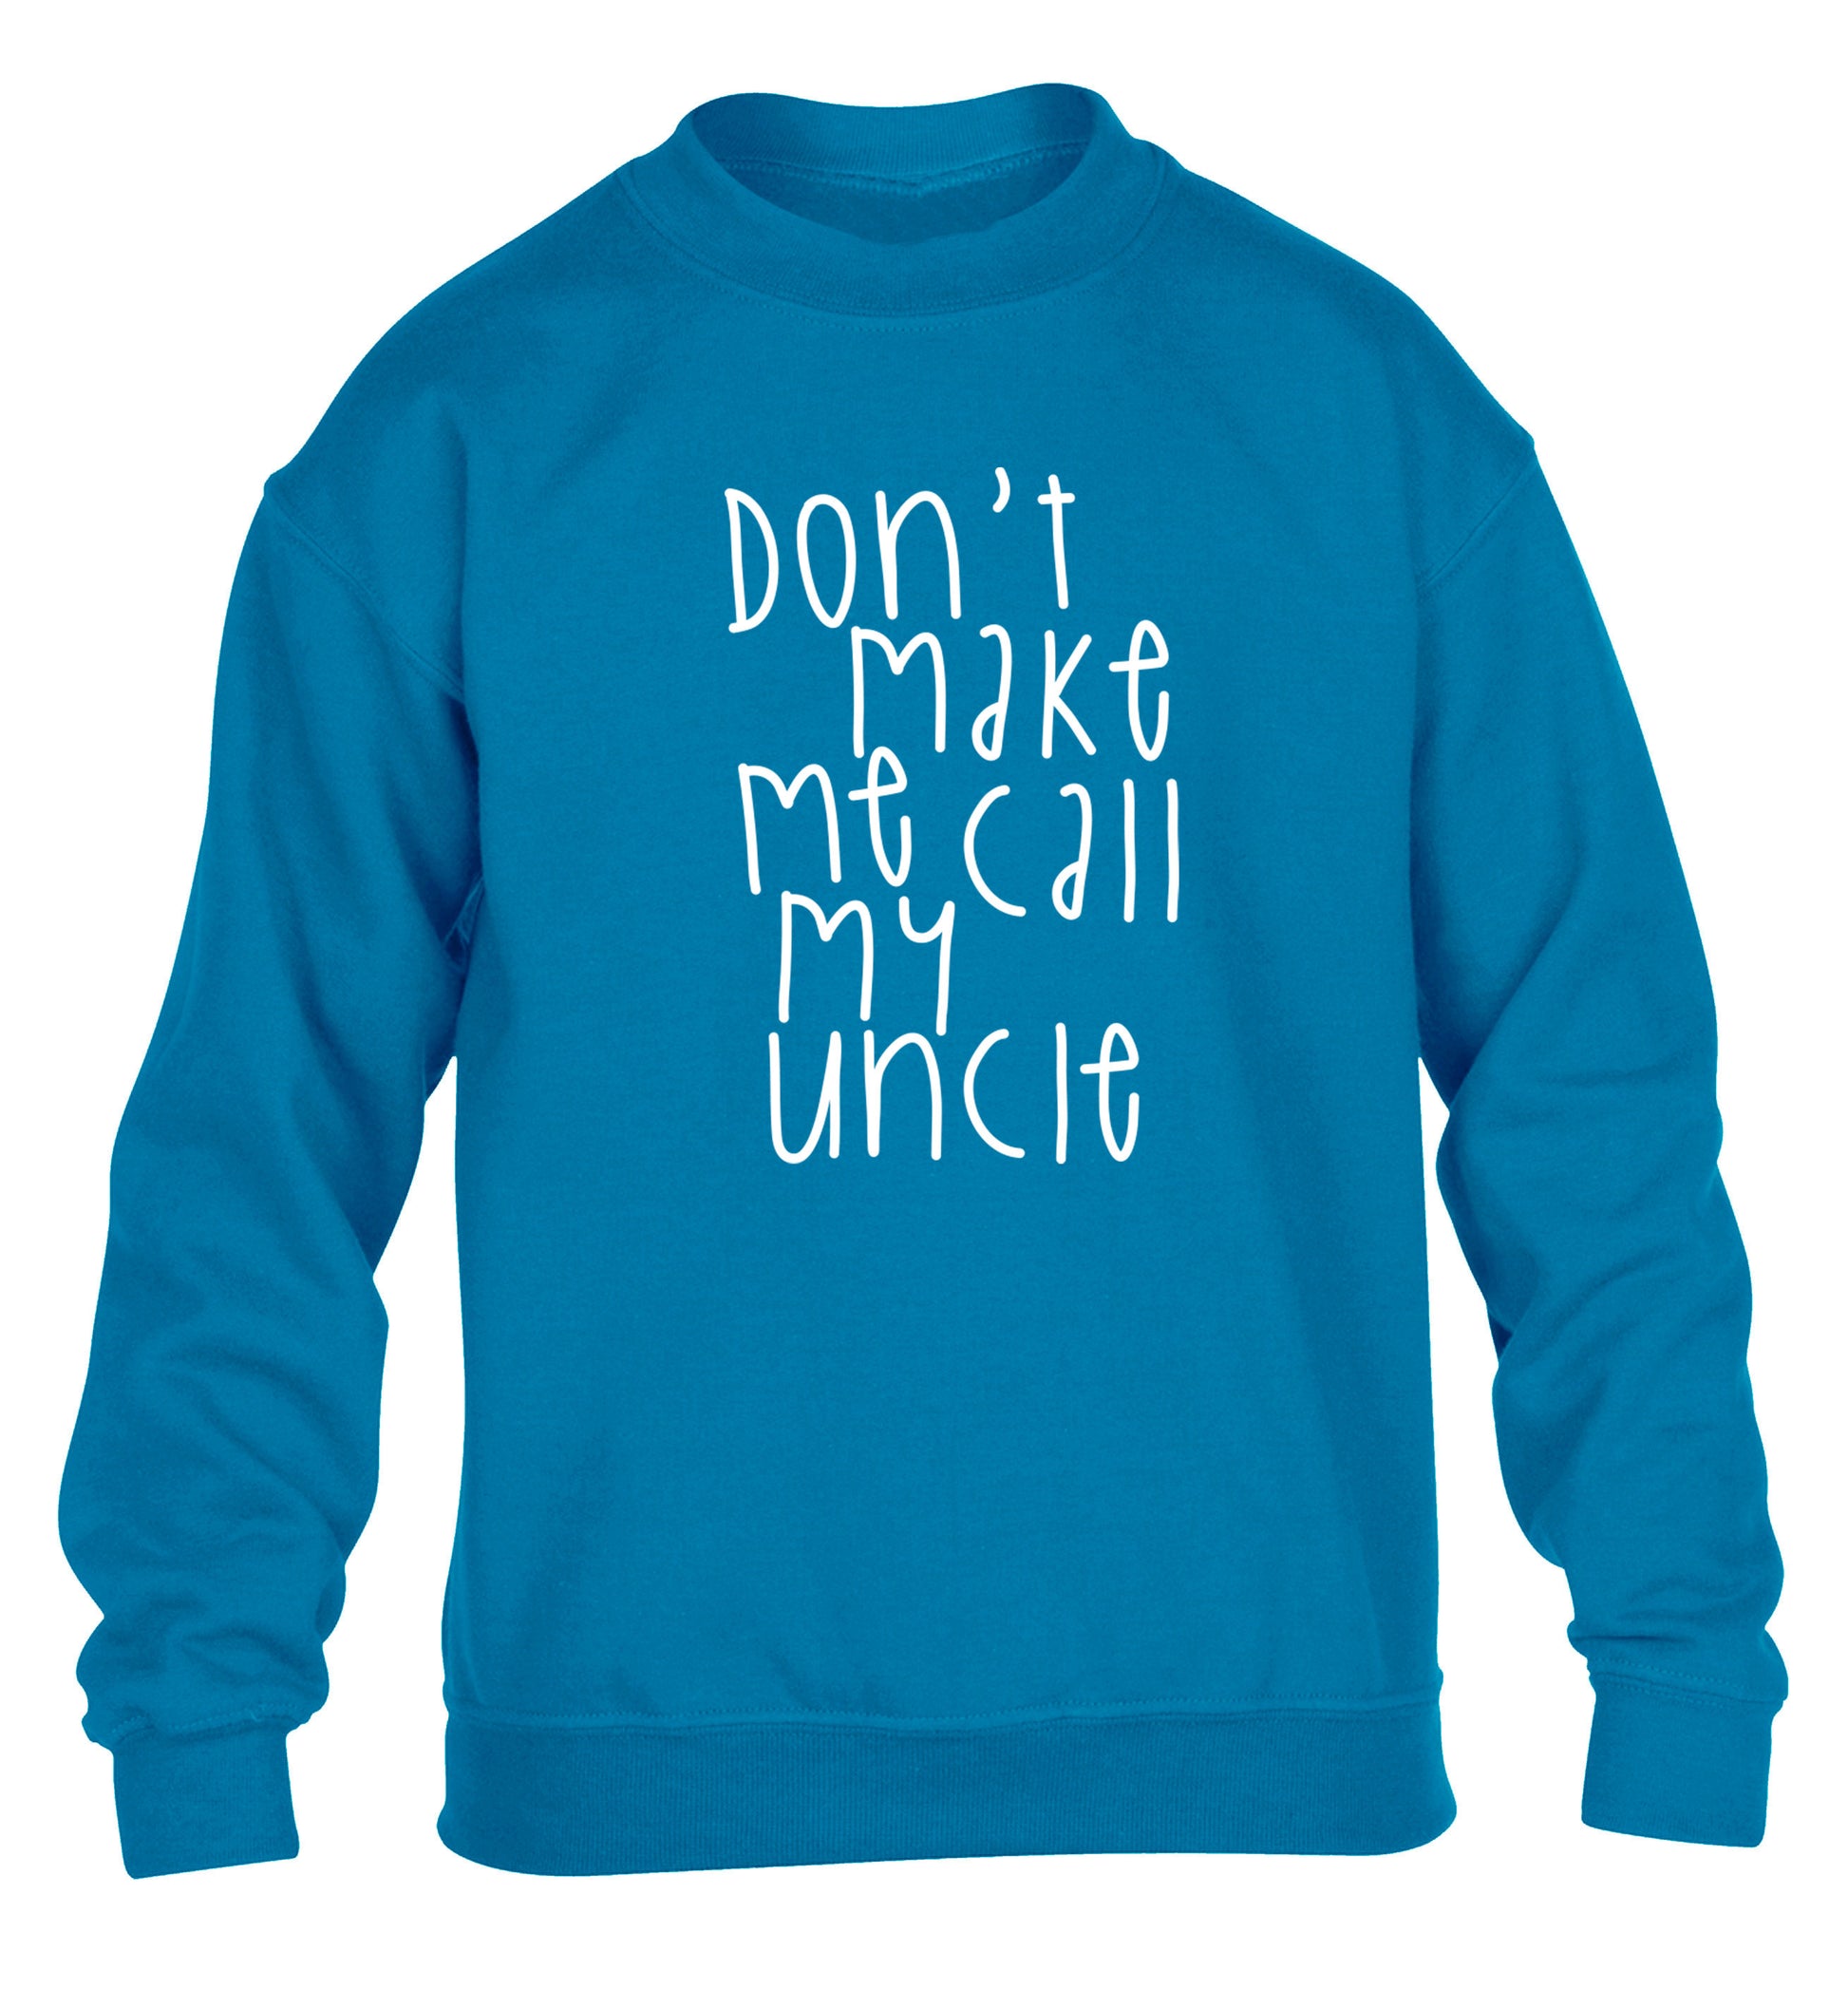 Don't make me call my uncle children's blue sweater 12-14 Years